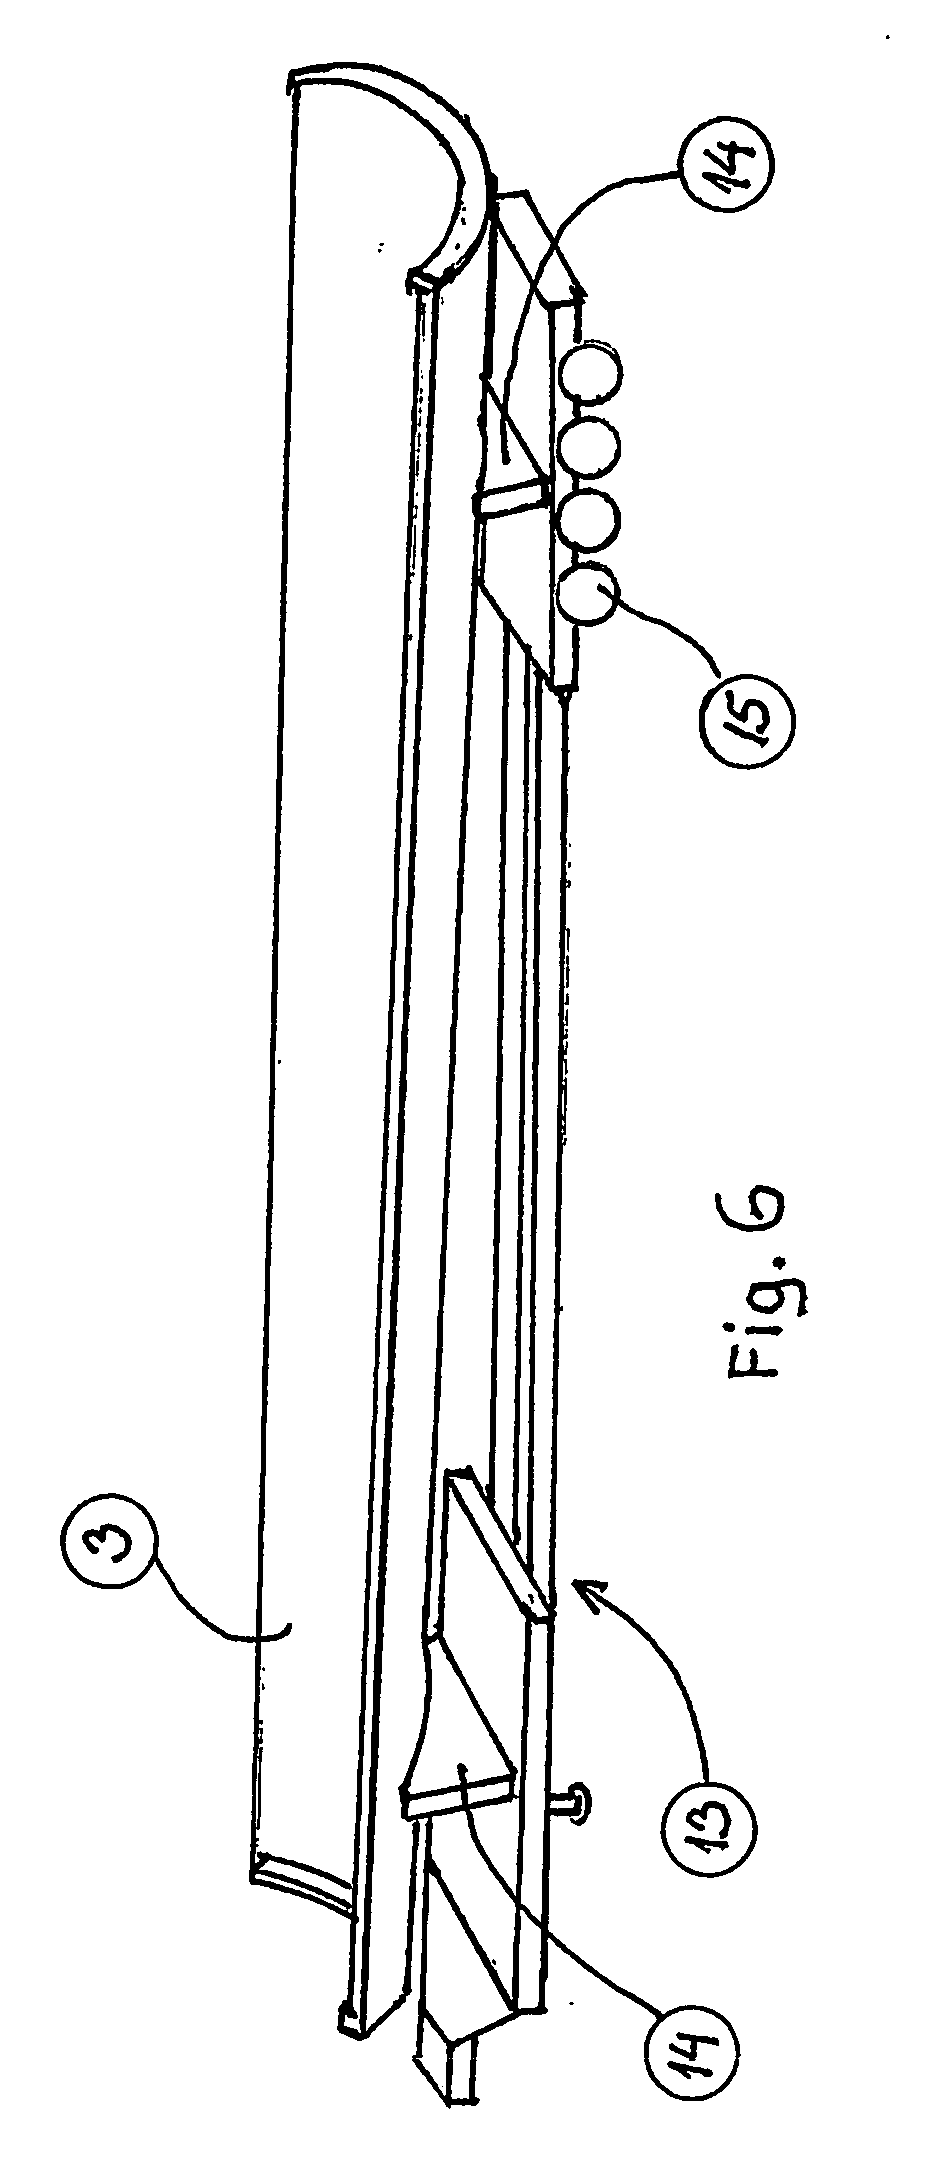 Method of contructing large towers for wind turbines